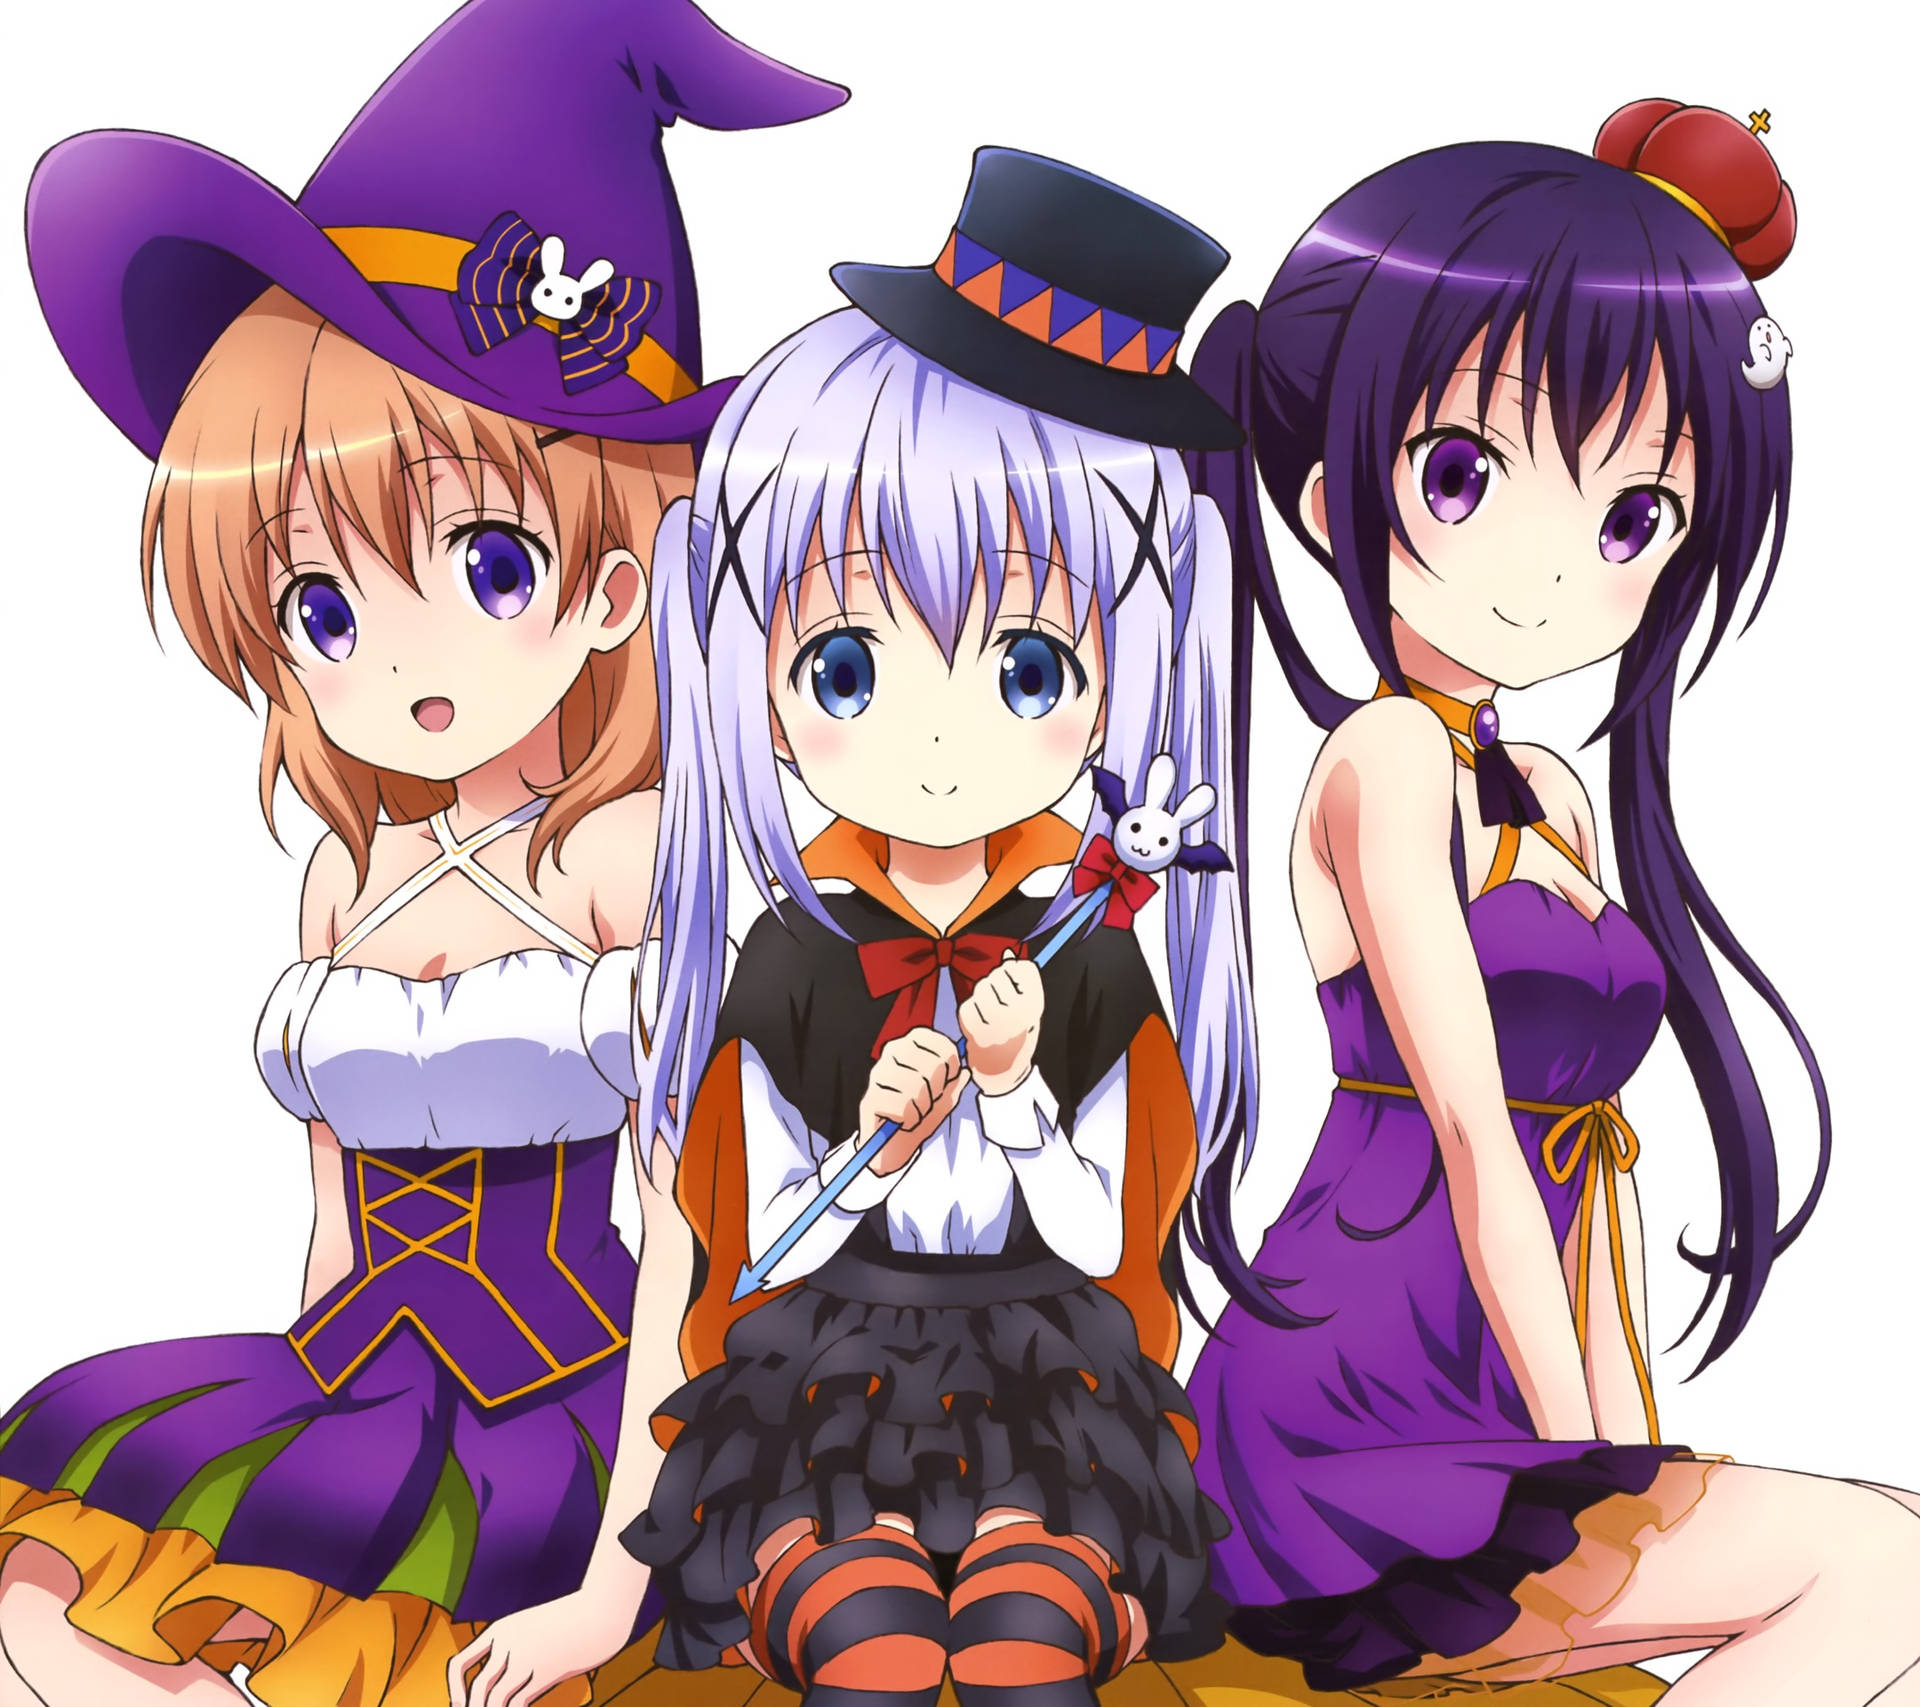 Trick or treat! Dress up in your favorite anime costume this Halloween. Wallpaper